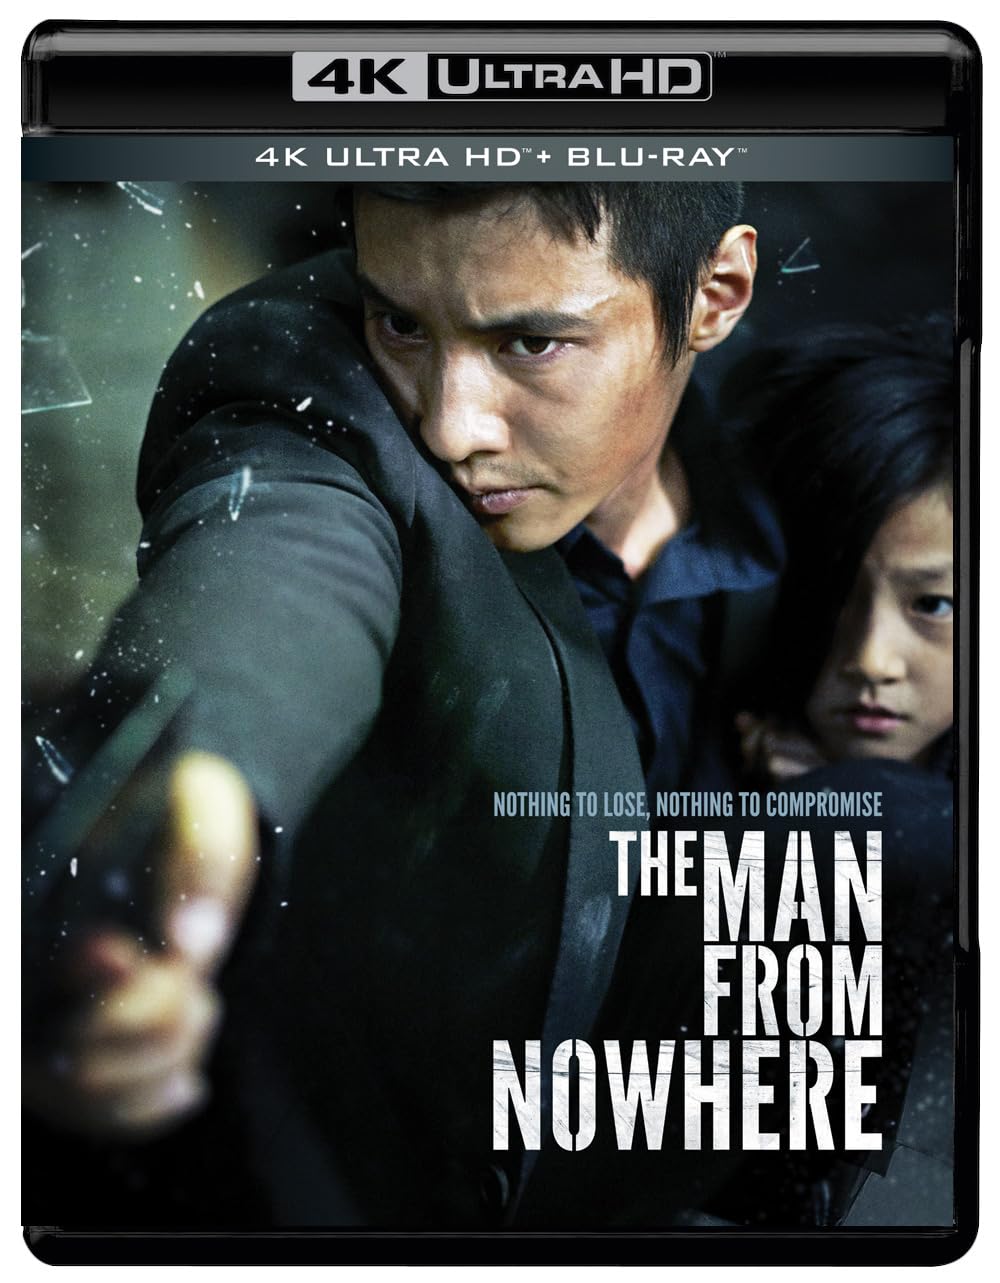 The Man From Nowhere 4K UHD + Blu-ray (Well Go USA) [Preorder]